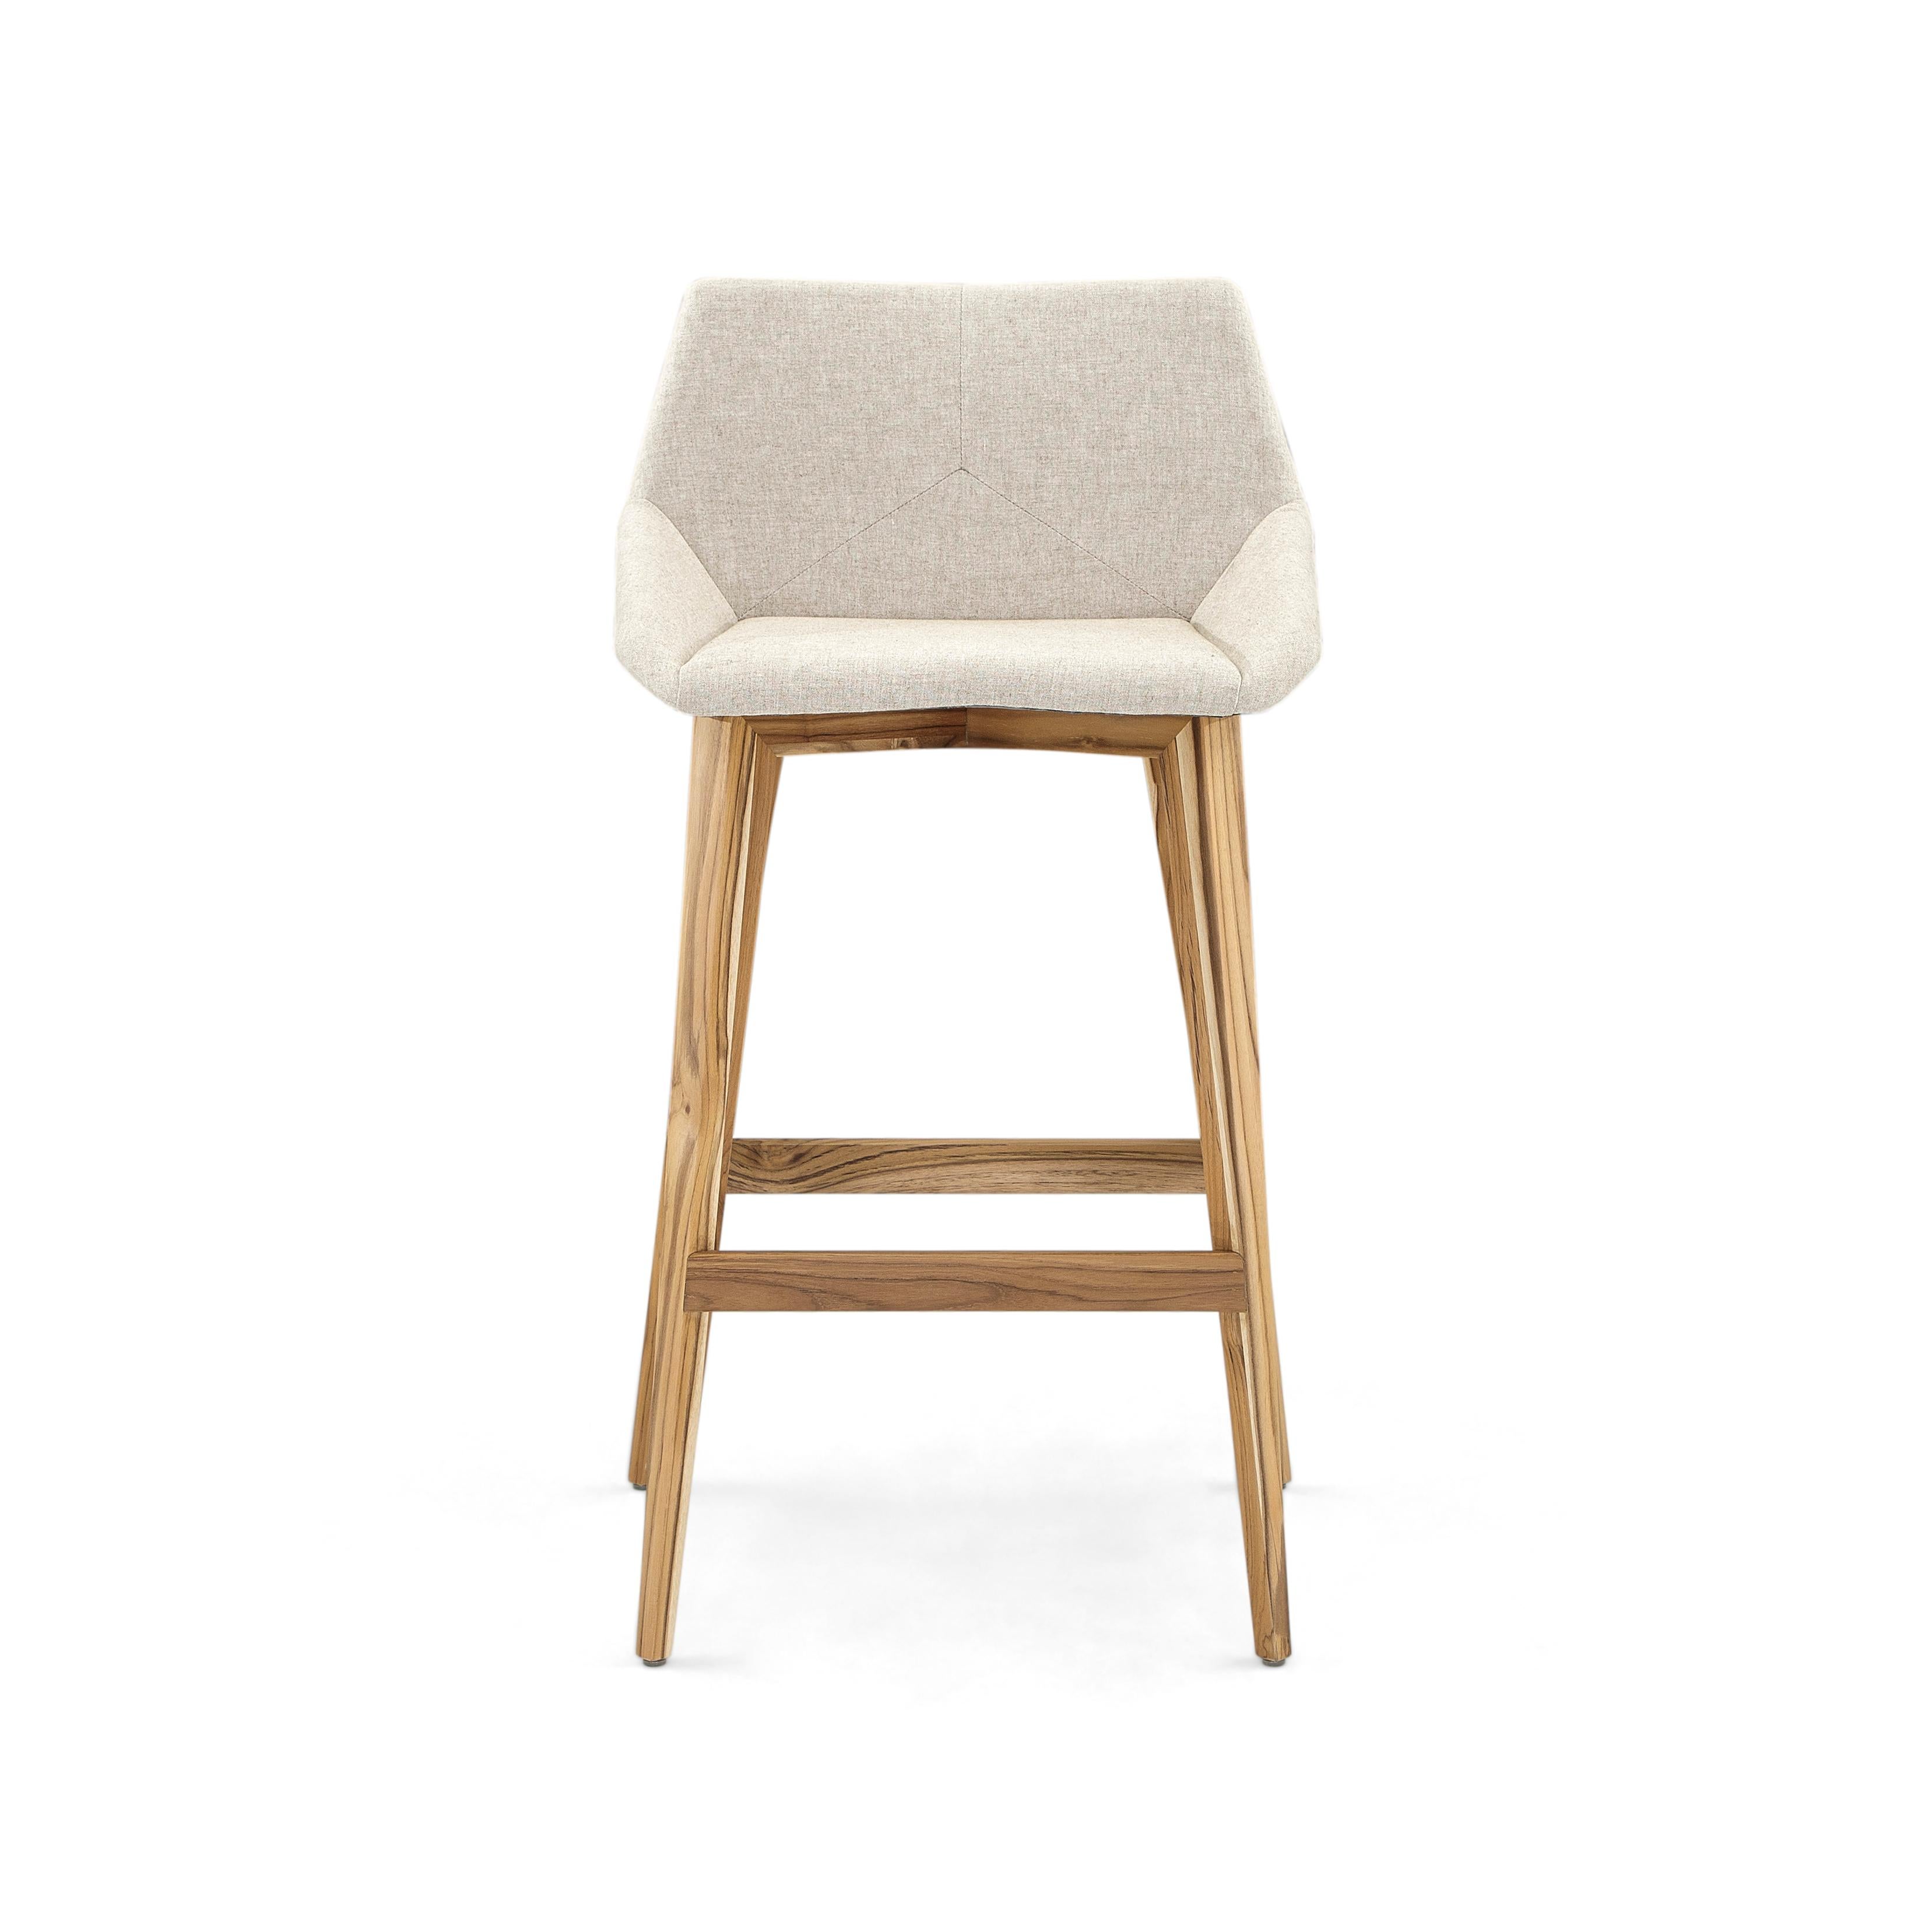 The geometric counter stool as the name says has geometric shapes and pure lines with its teak wooden legs with the seat all wrapped in a beautiful and soft oatmeal fabric. All of these small details thought by architects and designers by our Uultis